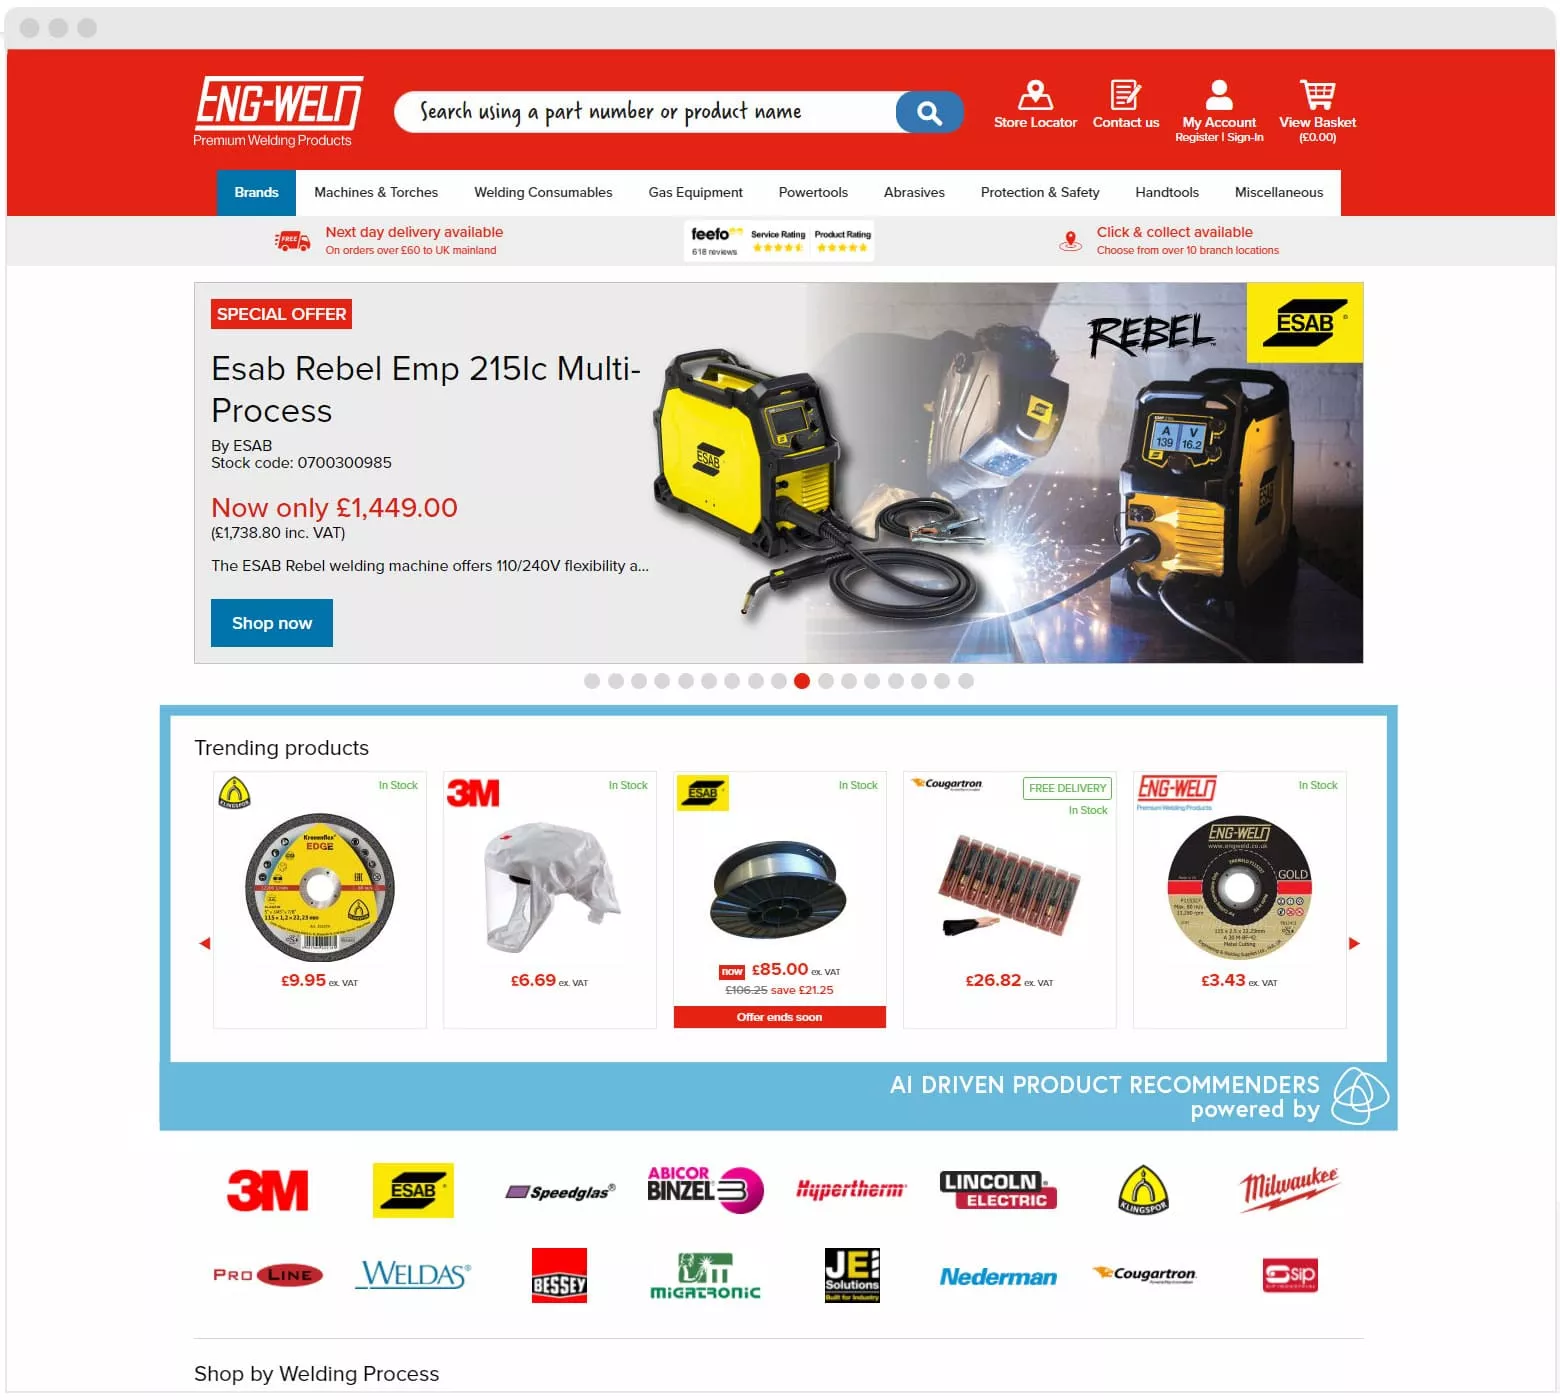 Engweld’s use of AI product recommenders on the homepage to promote product awareness